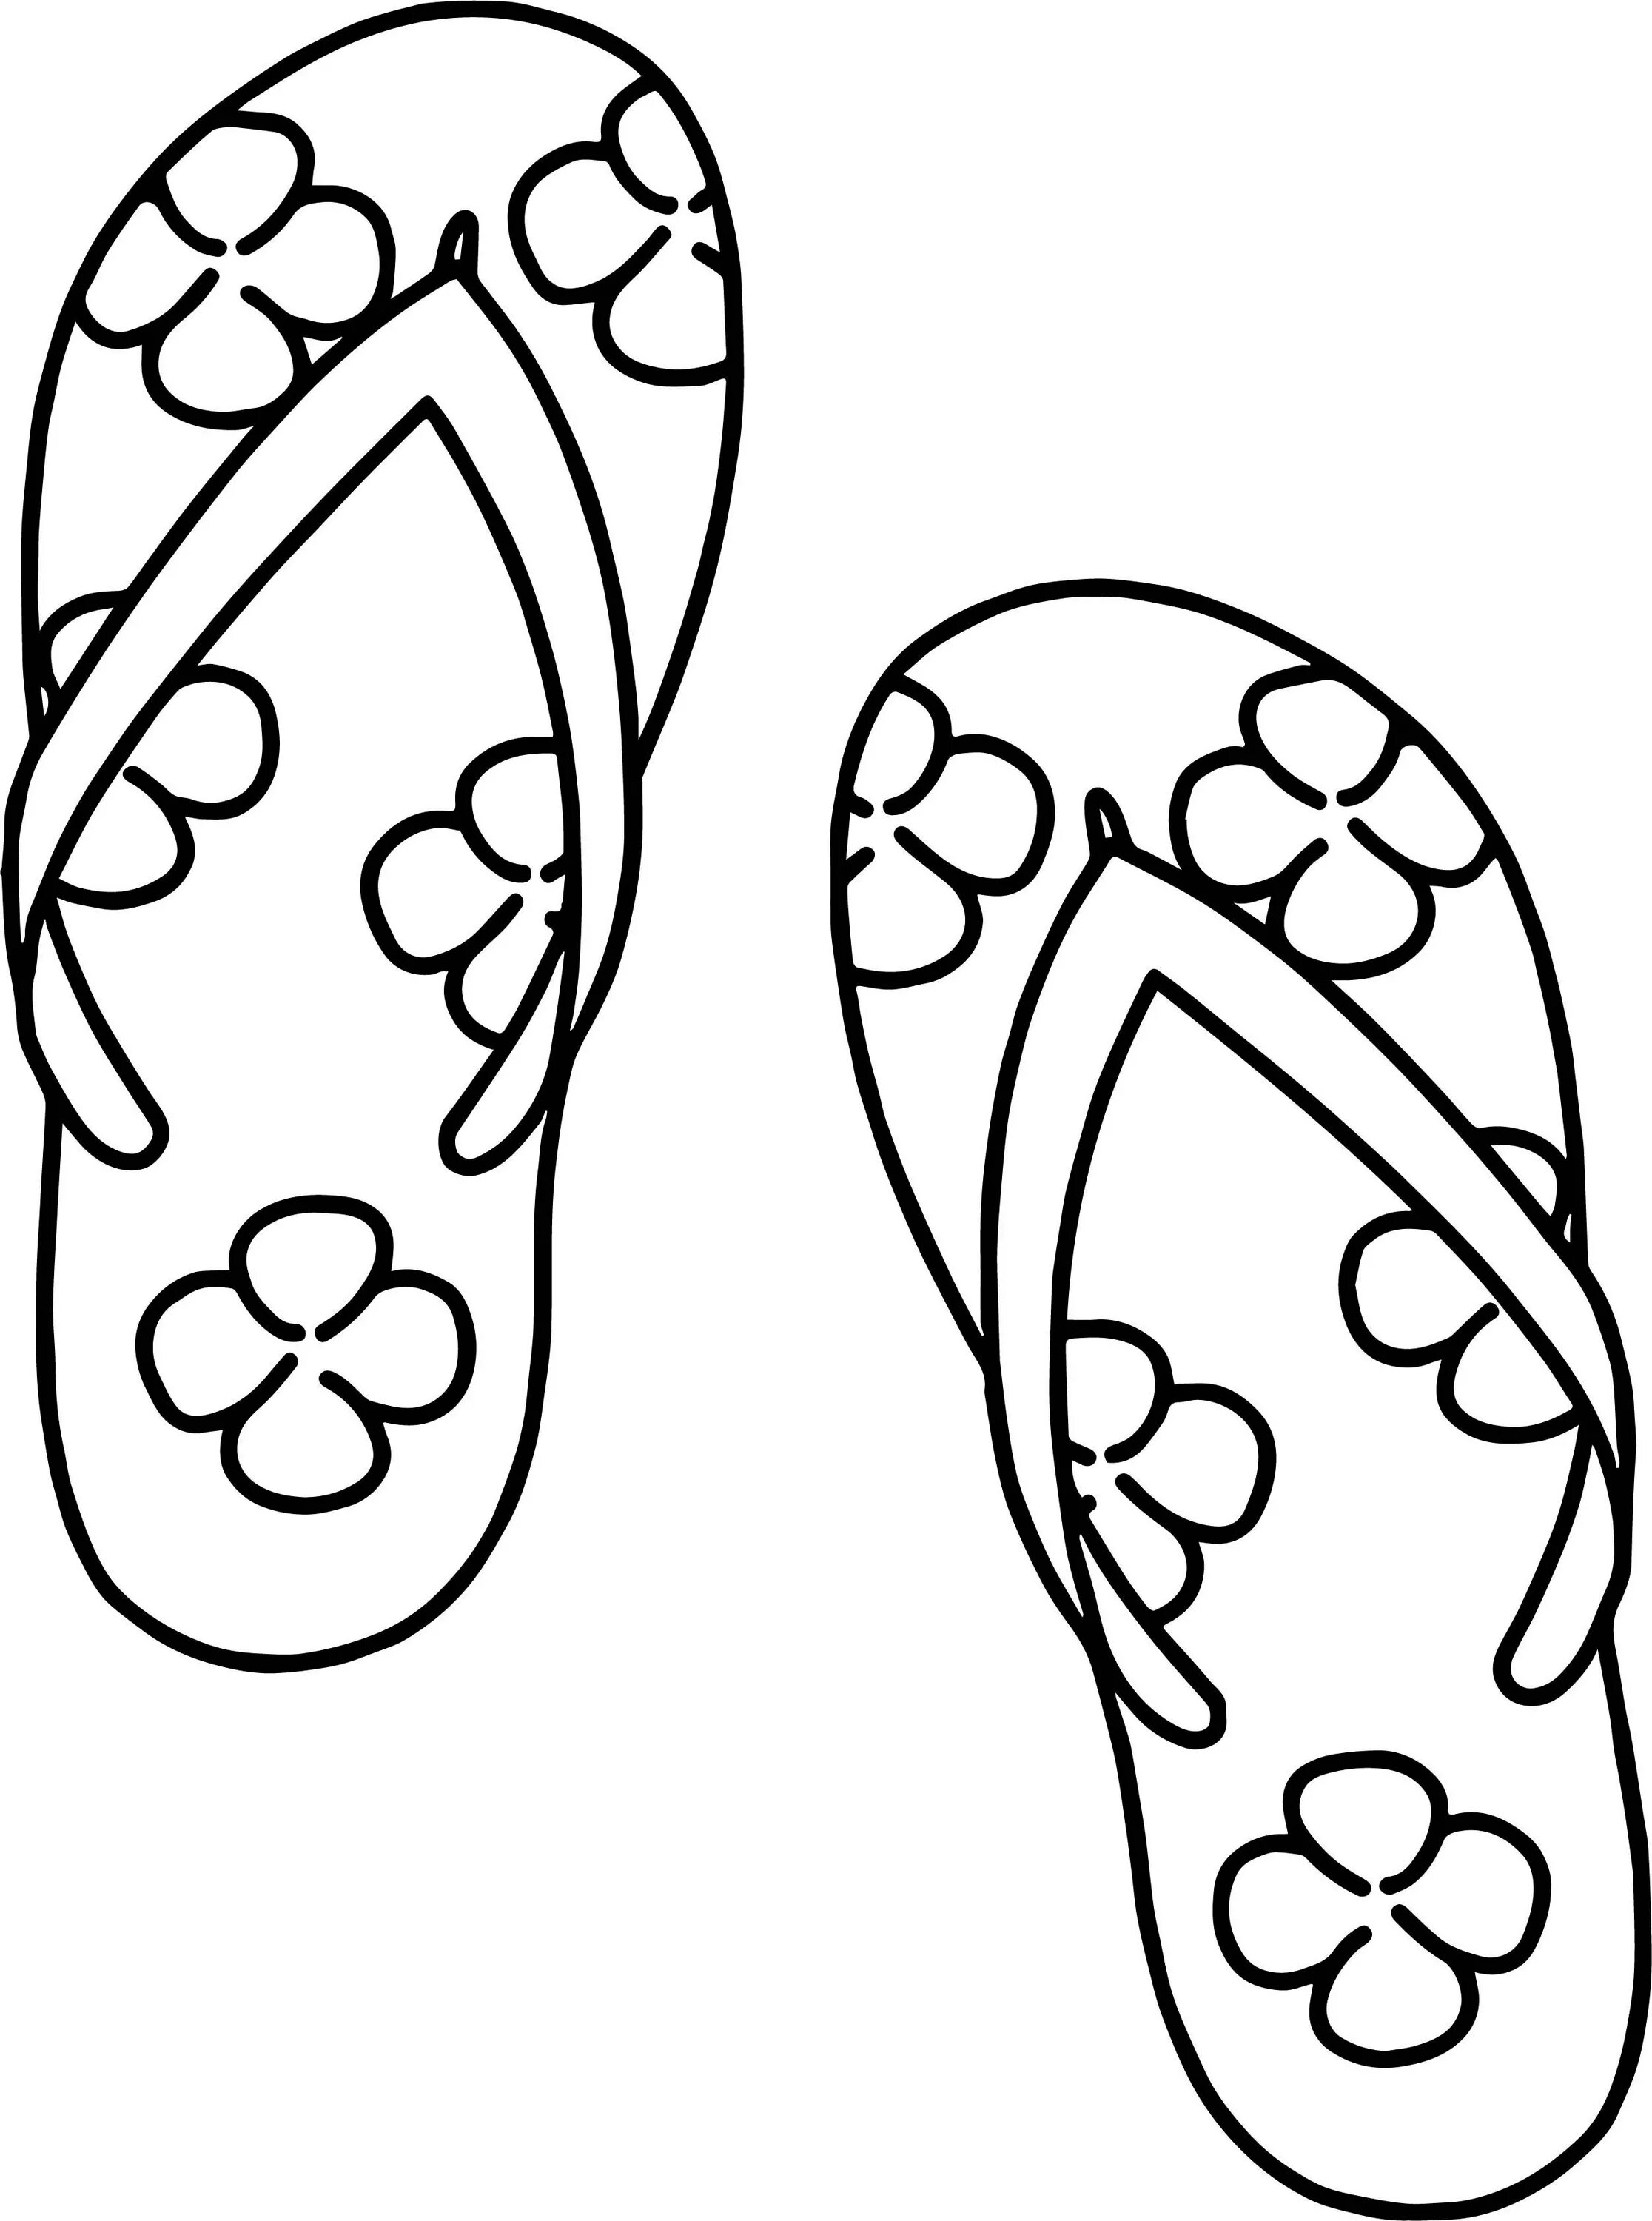 Incredible slippers coloring book for kids